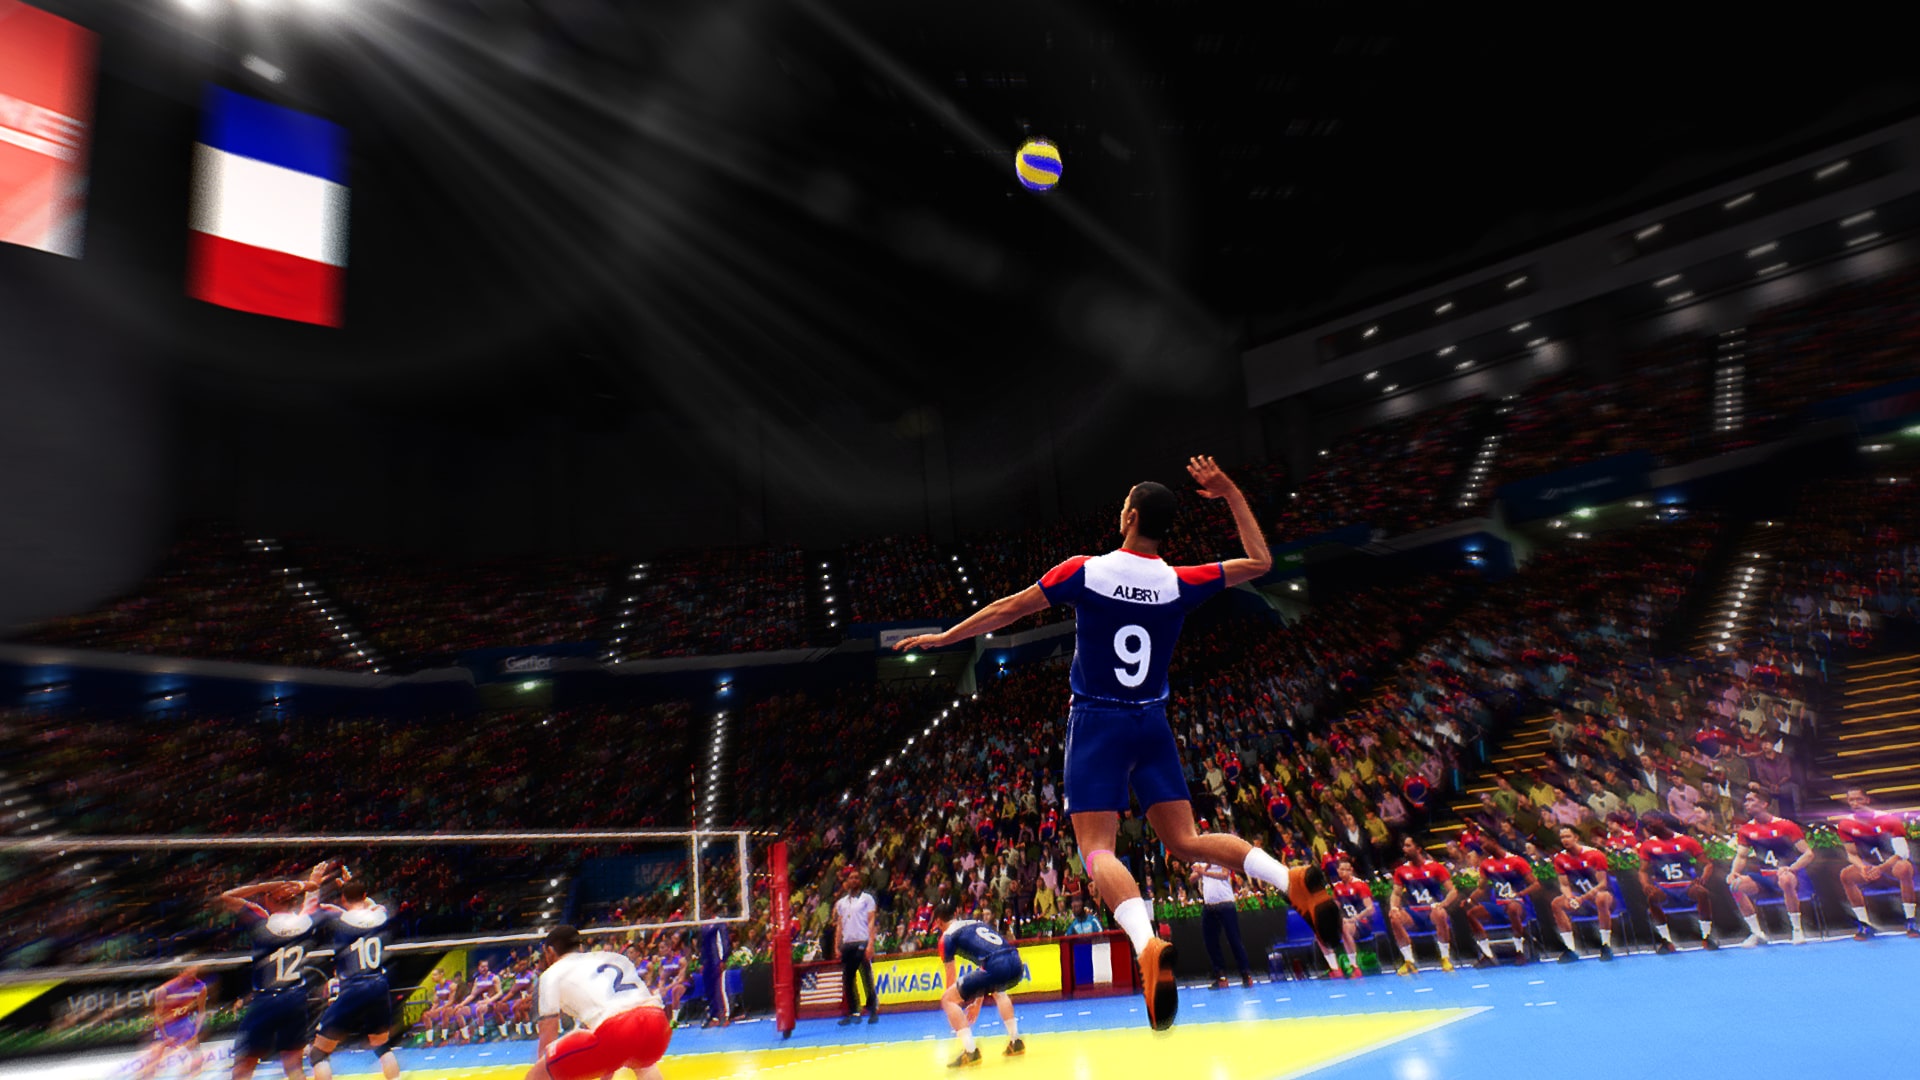 Spike Volleyball Sur Ps4 Playstation™store Officiel France